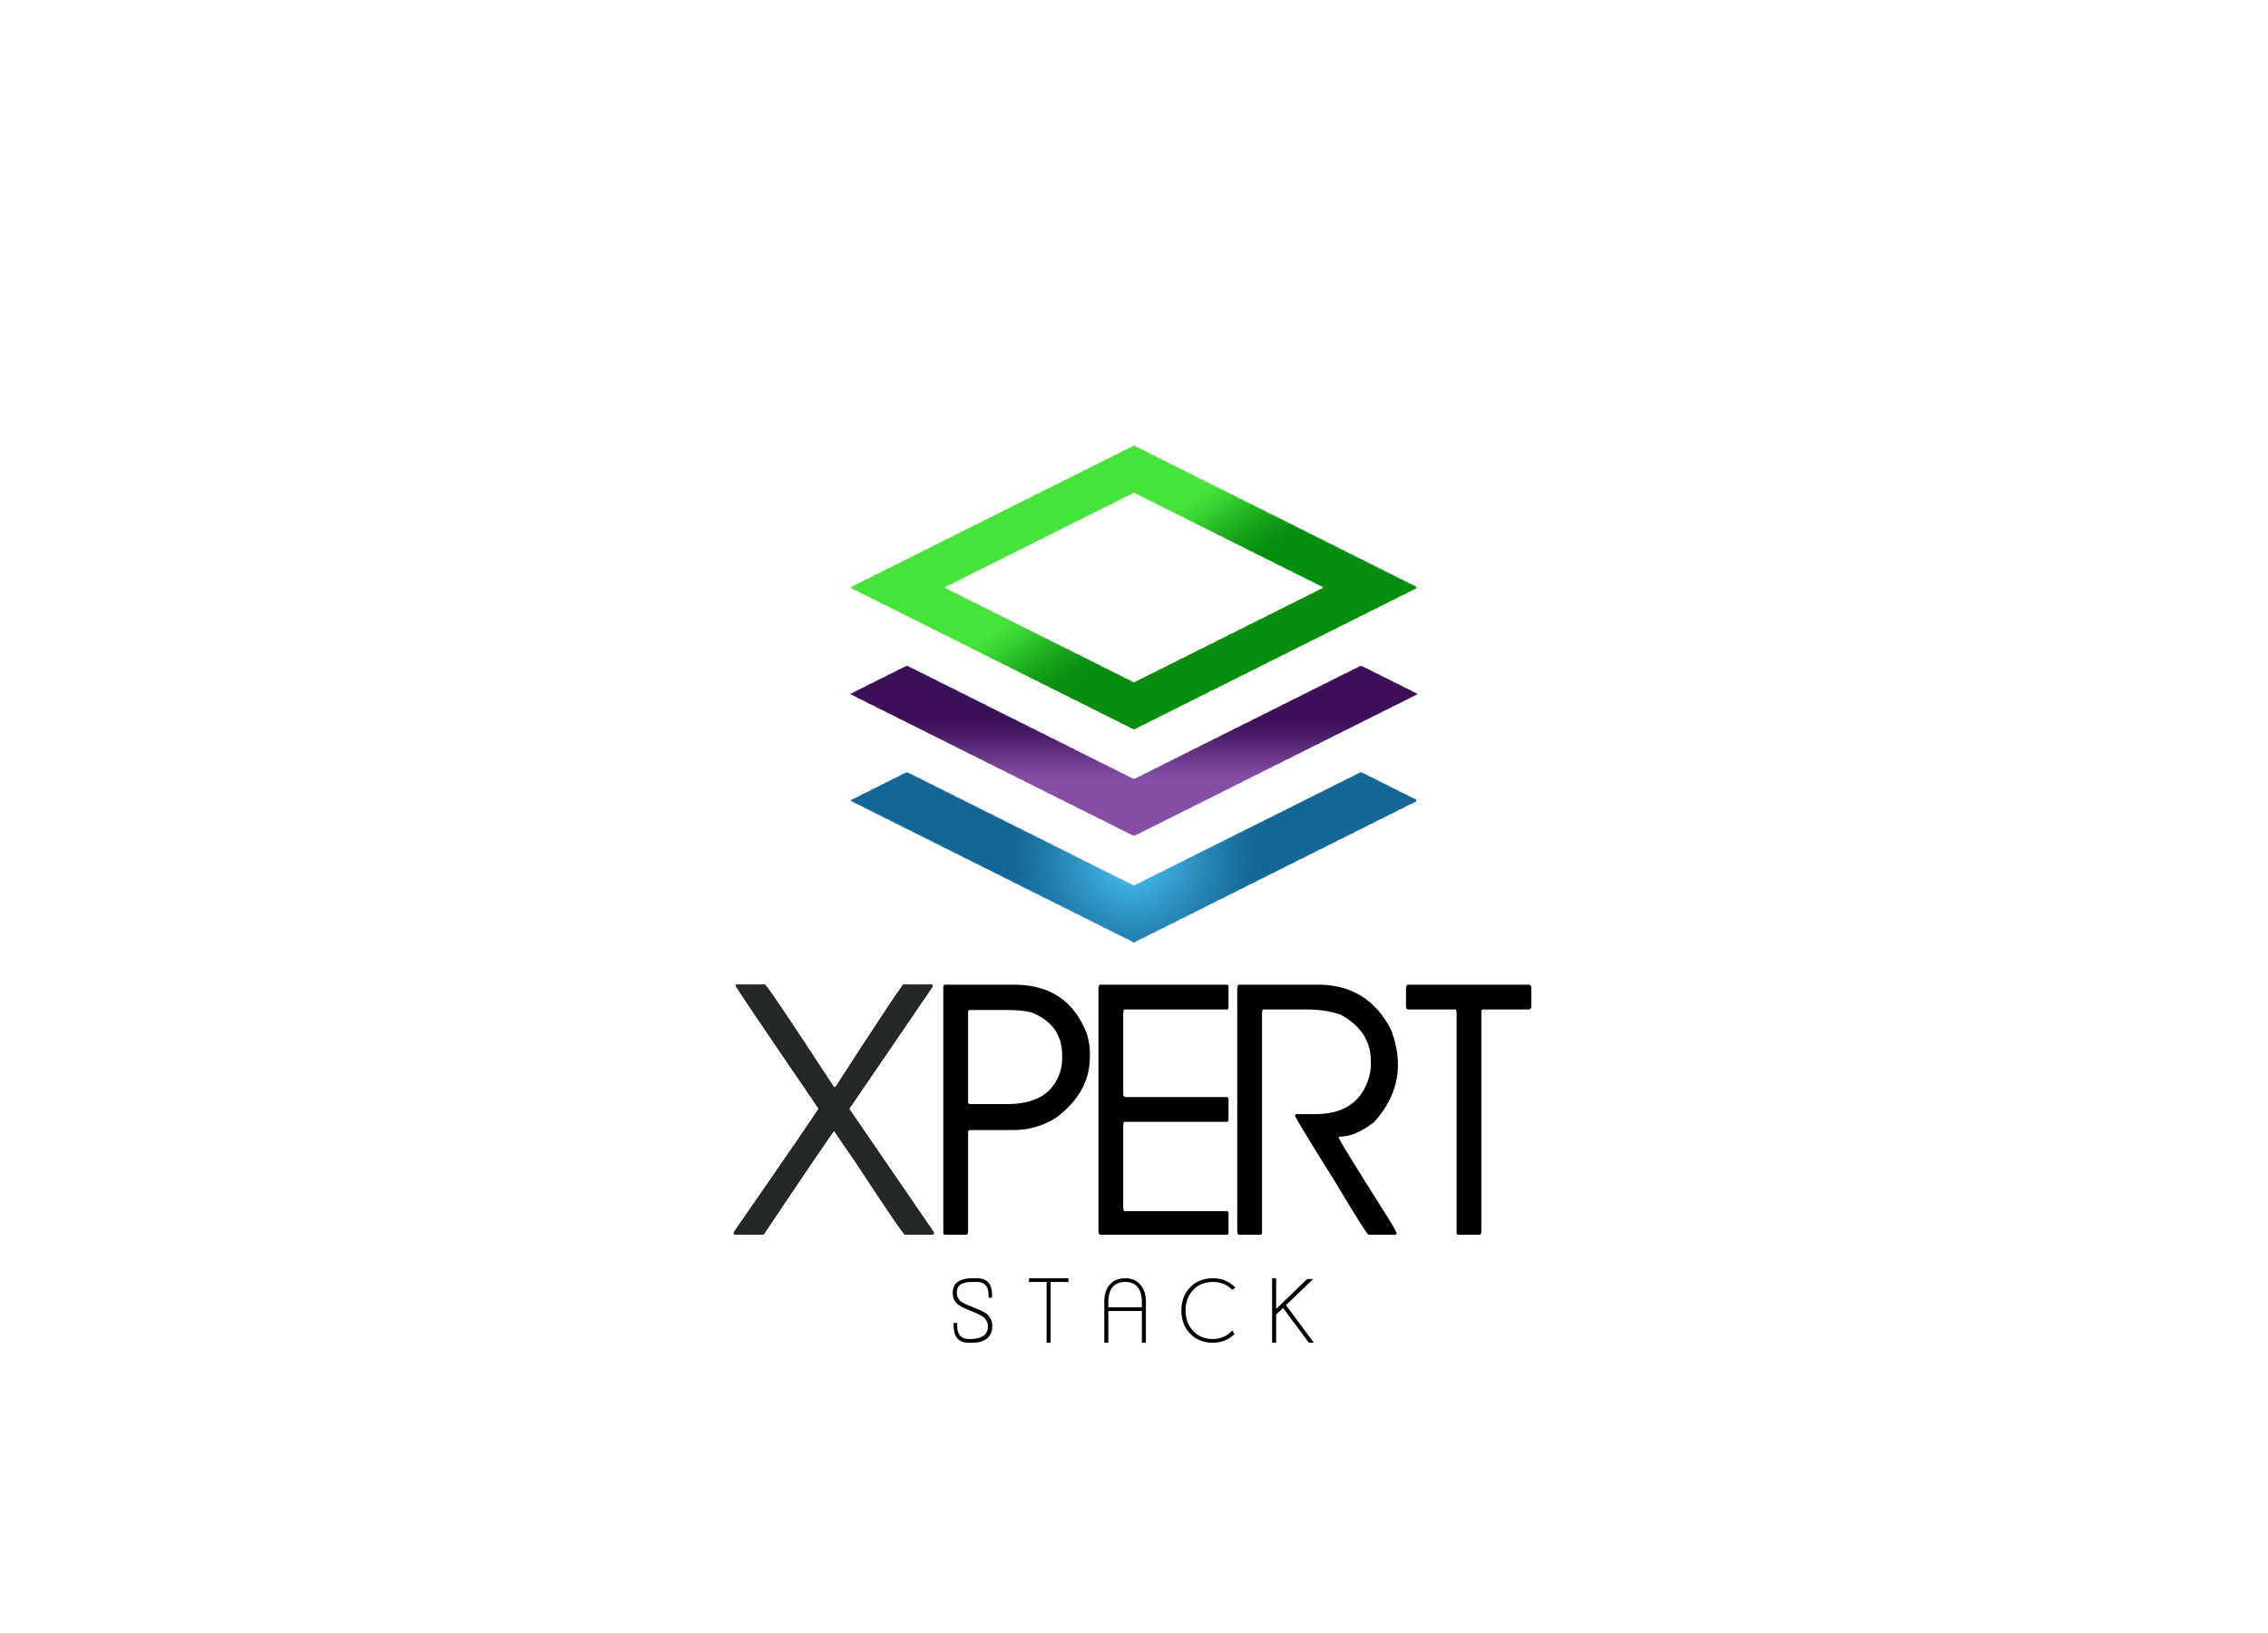 Stack Logo - File:Xpert Stack Logo.png - Wikimedia Commons